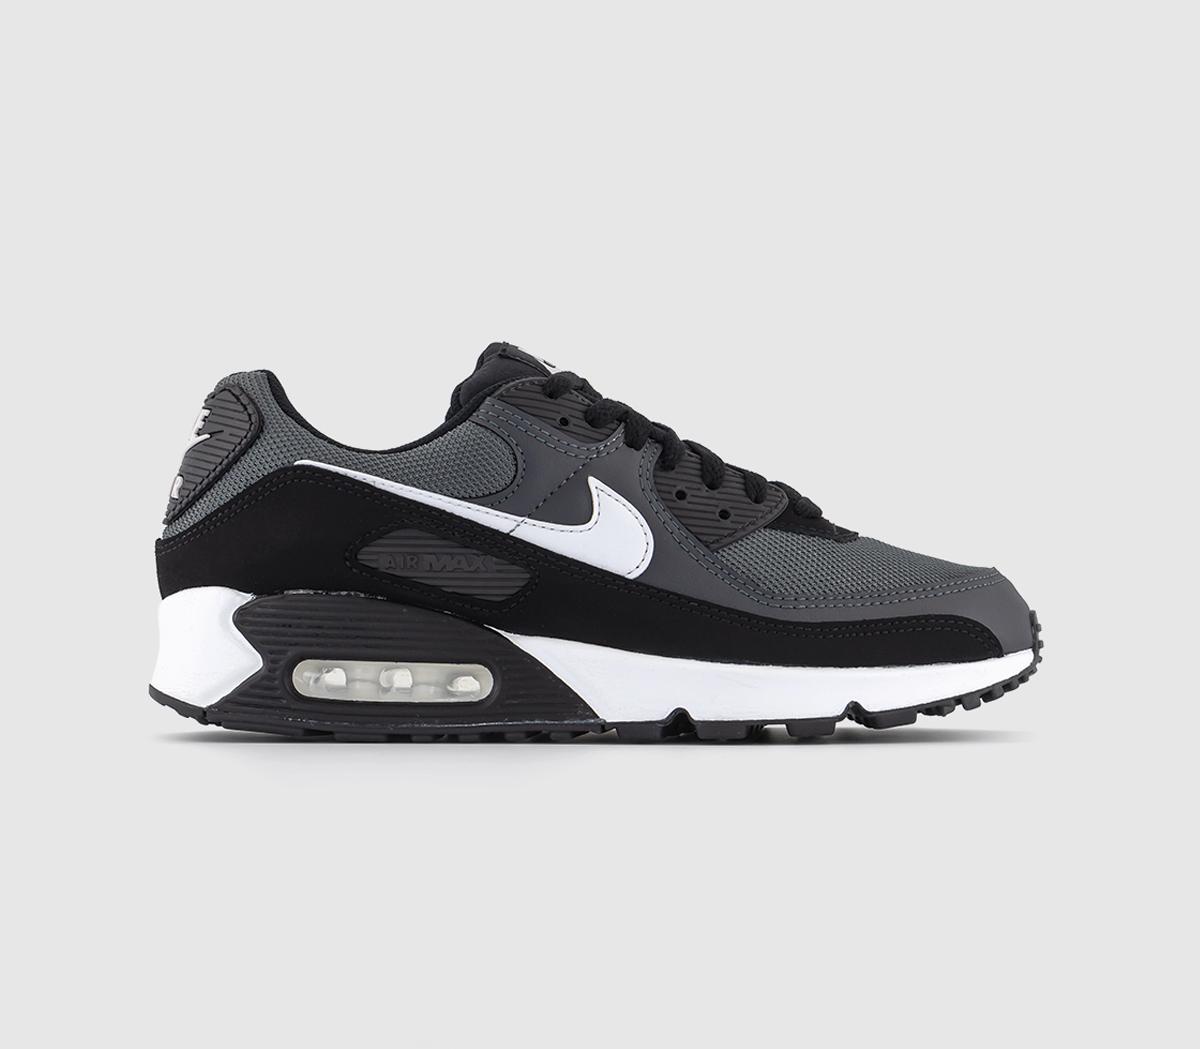 NikeAir Max 90 TrainersBlack White Leather